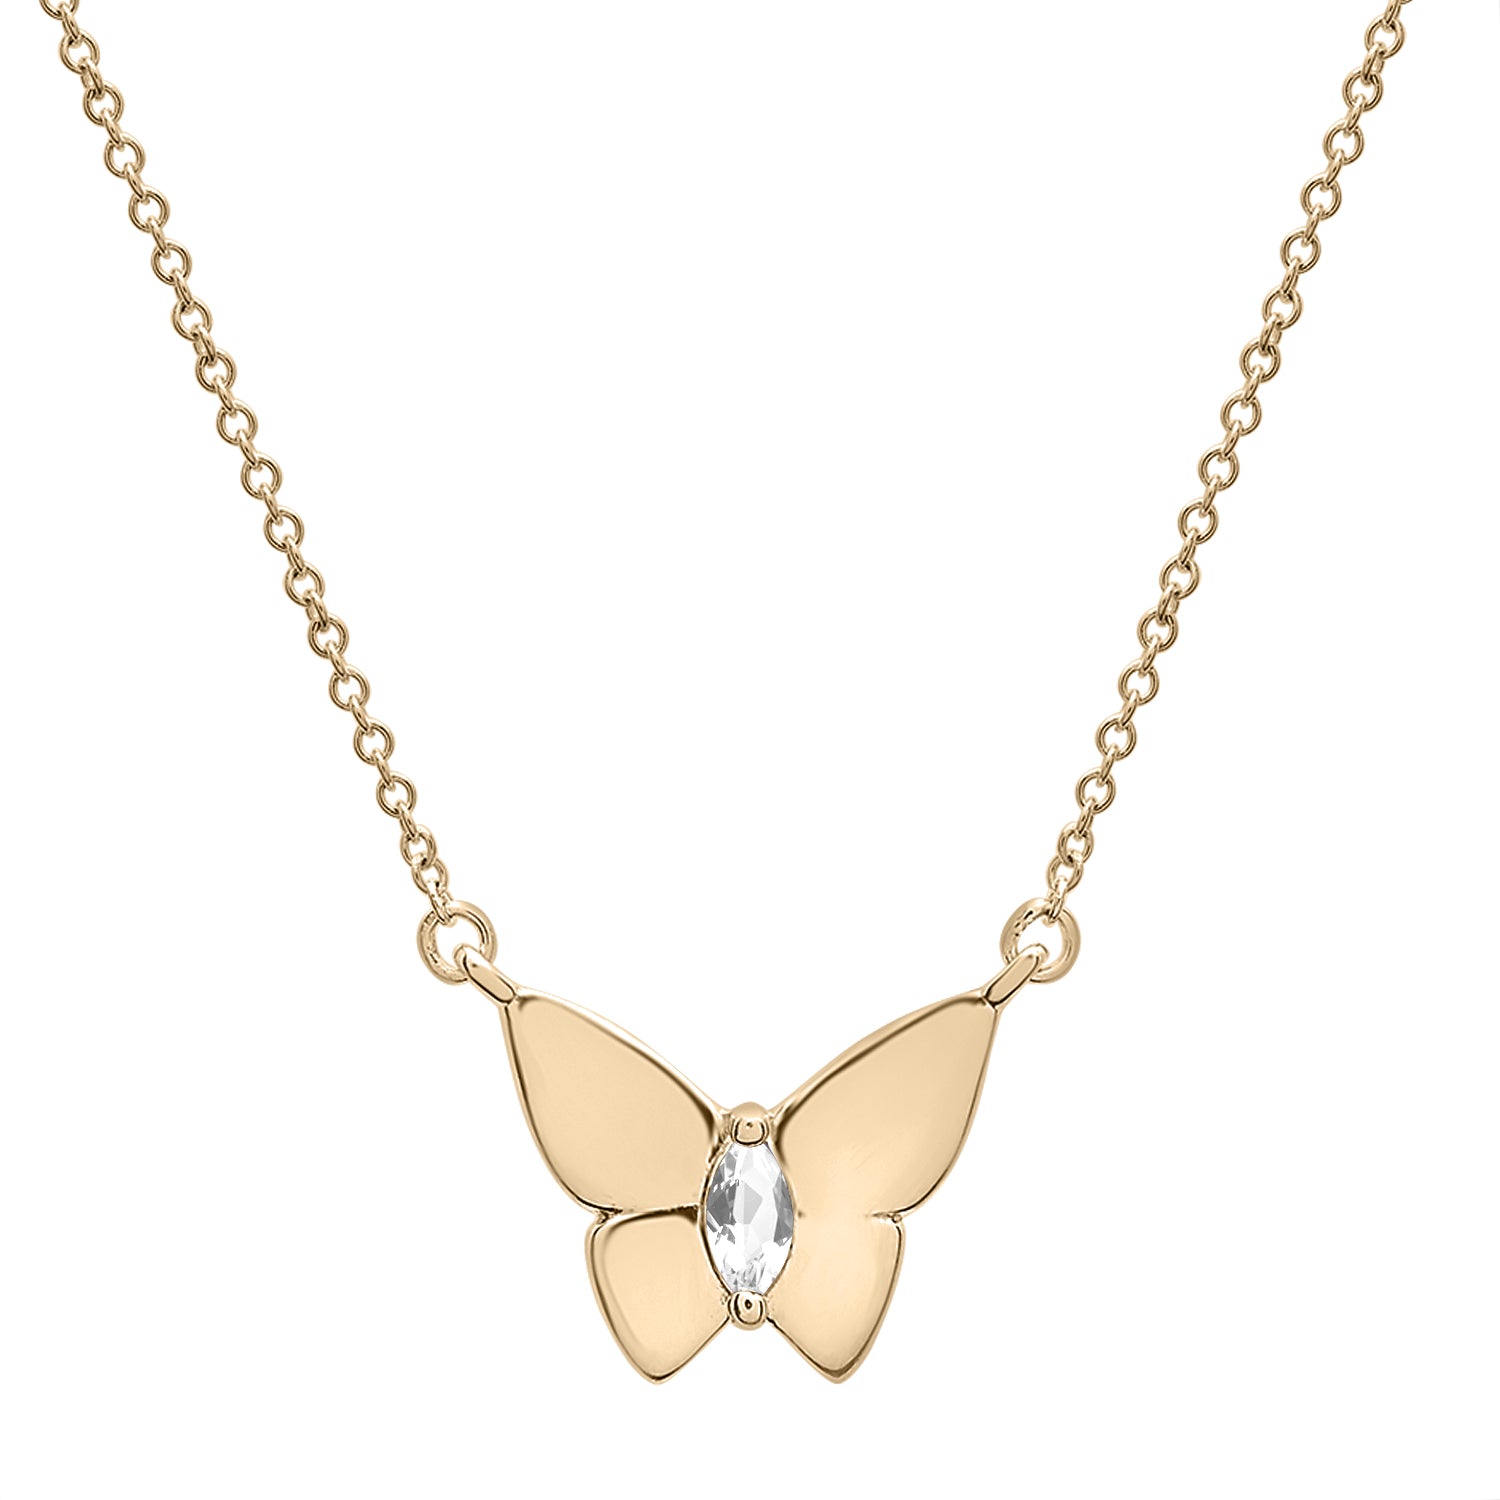 Silver Gray Stone Butterfly Birthstone Necklace in Gold chain